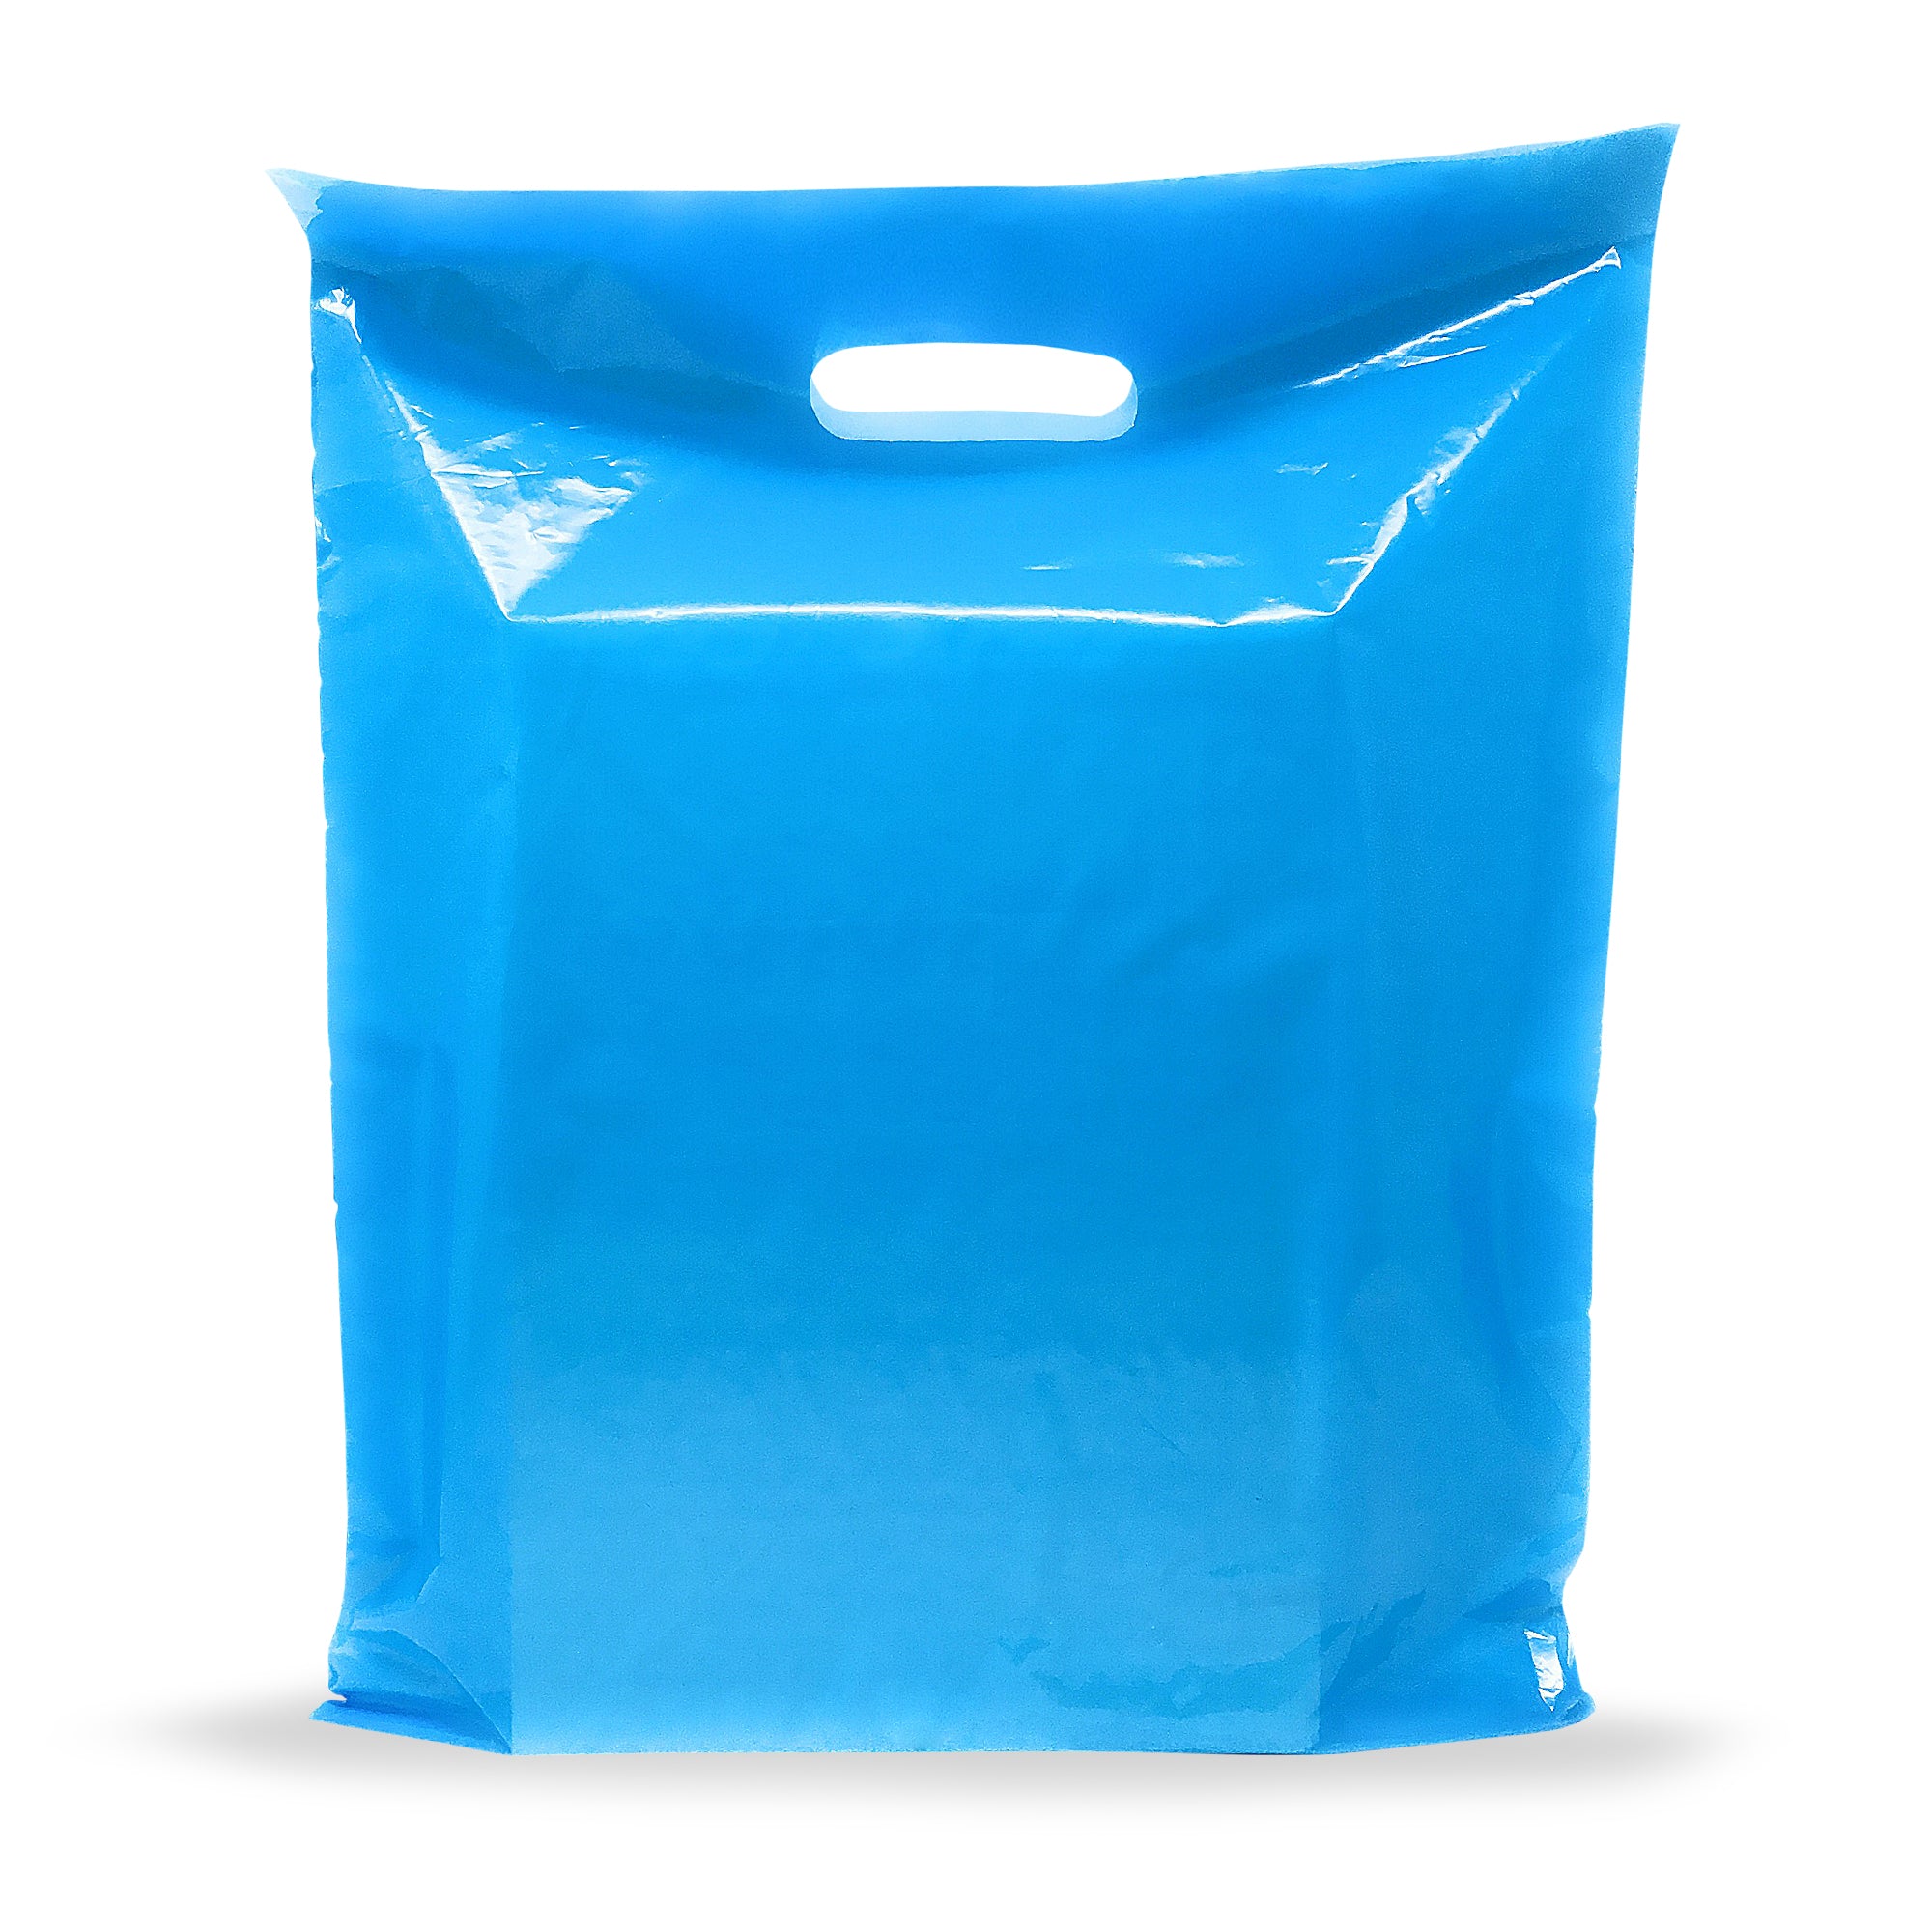 Extra Large Blue Plastic Shopping Bags - 50NP18BL45 - BagsOnNet